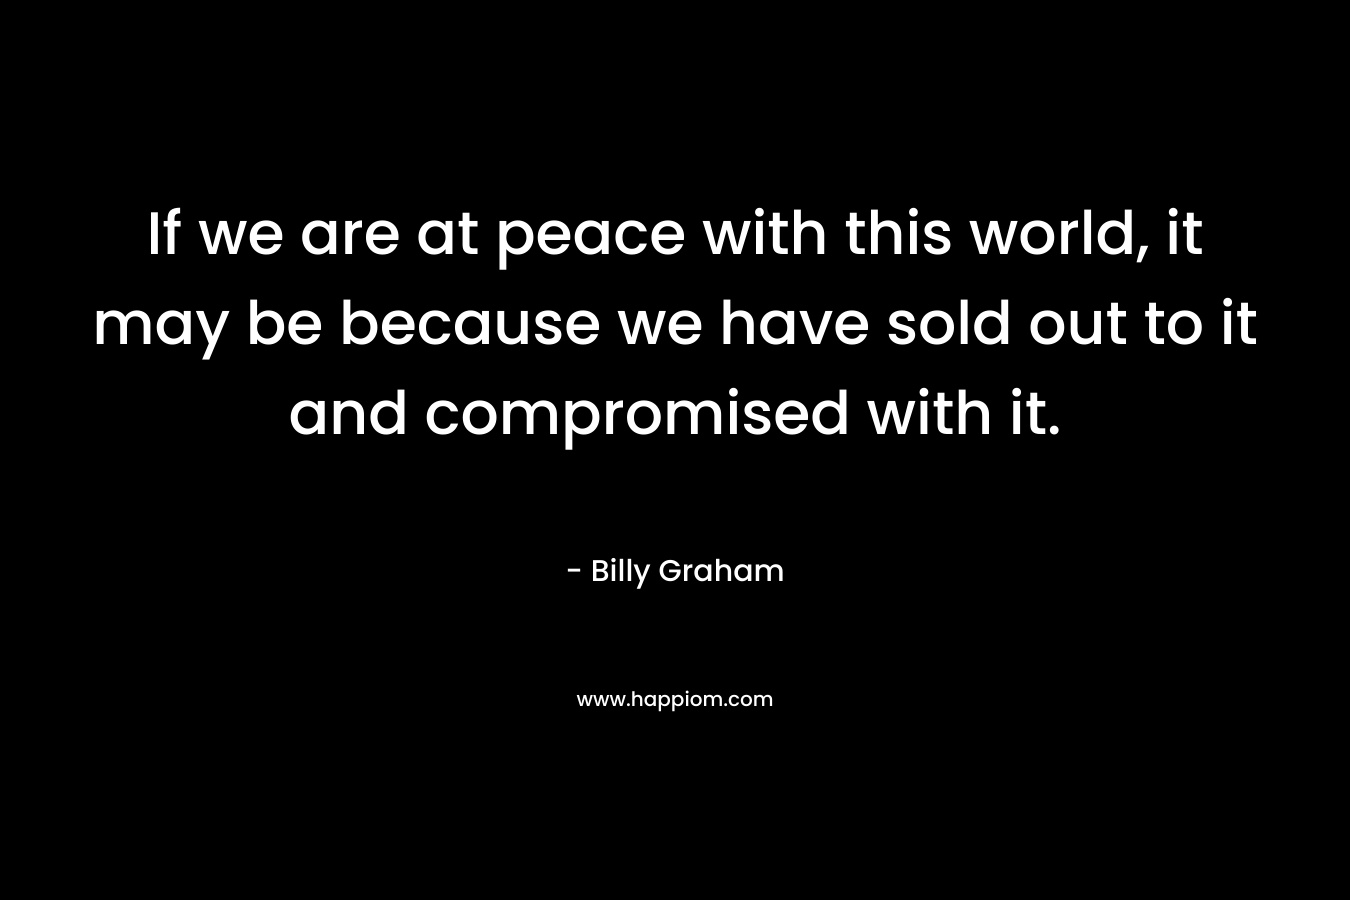 If we are at peace with this world, it may be because we have sold out to it and compromised with it.